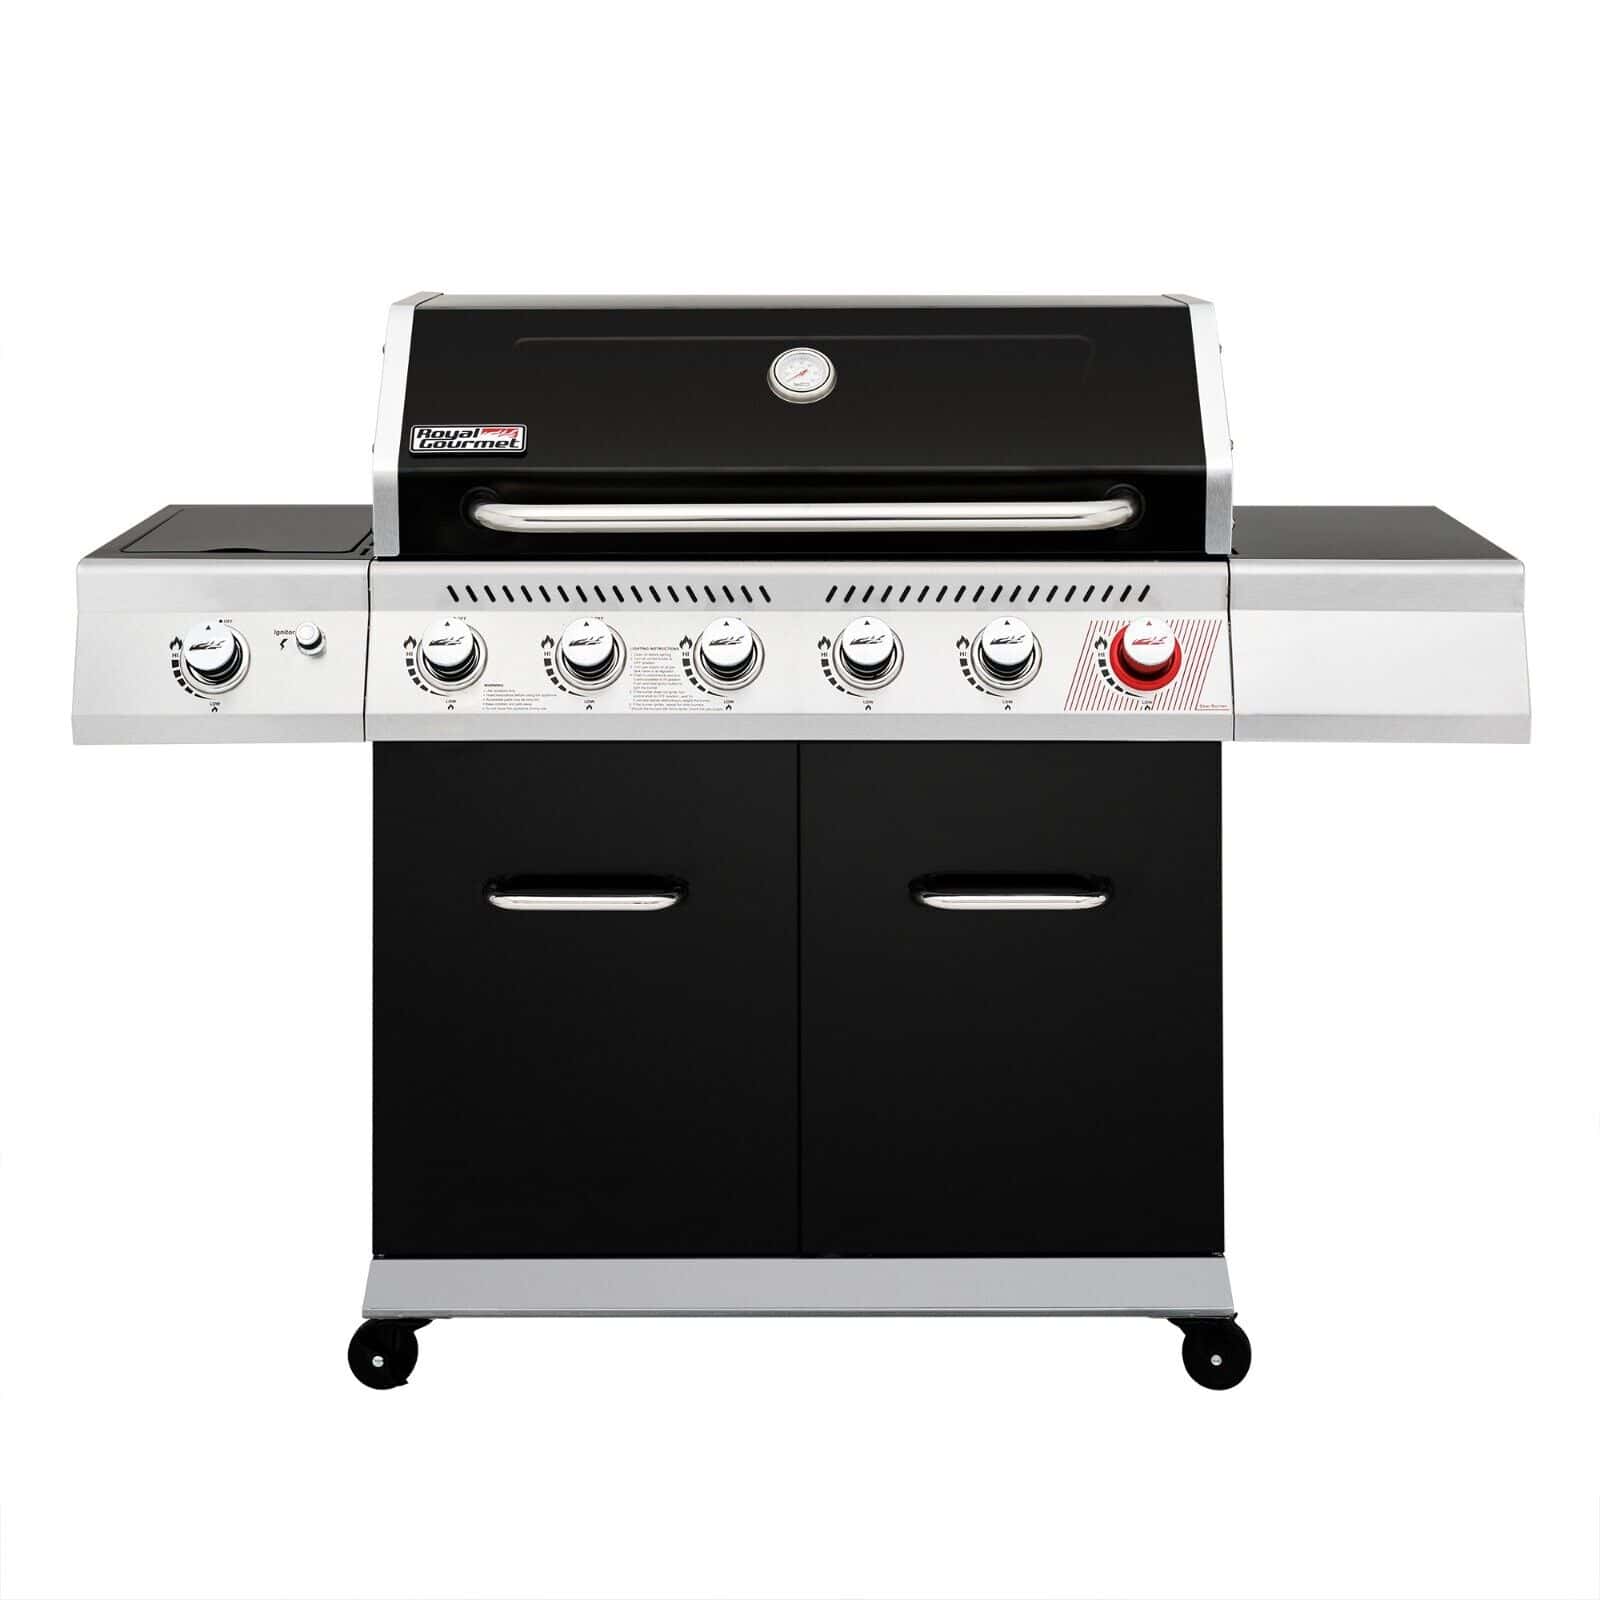 A black gas grill with four burners.